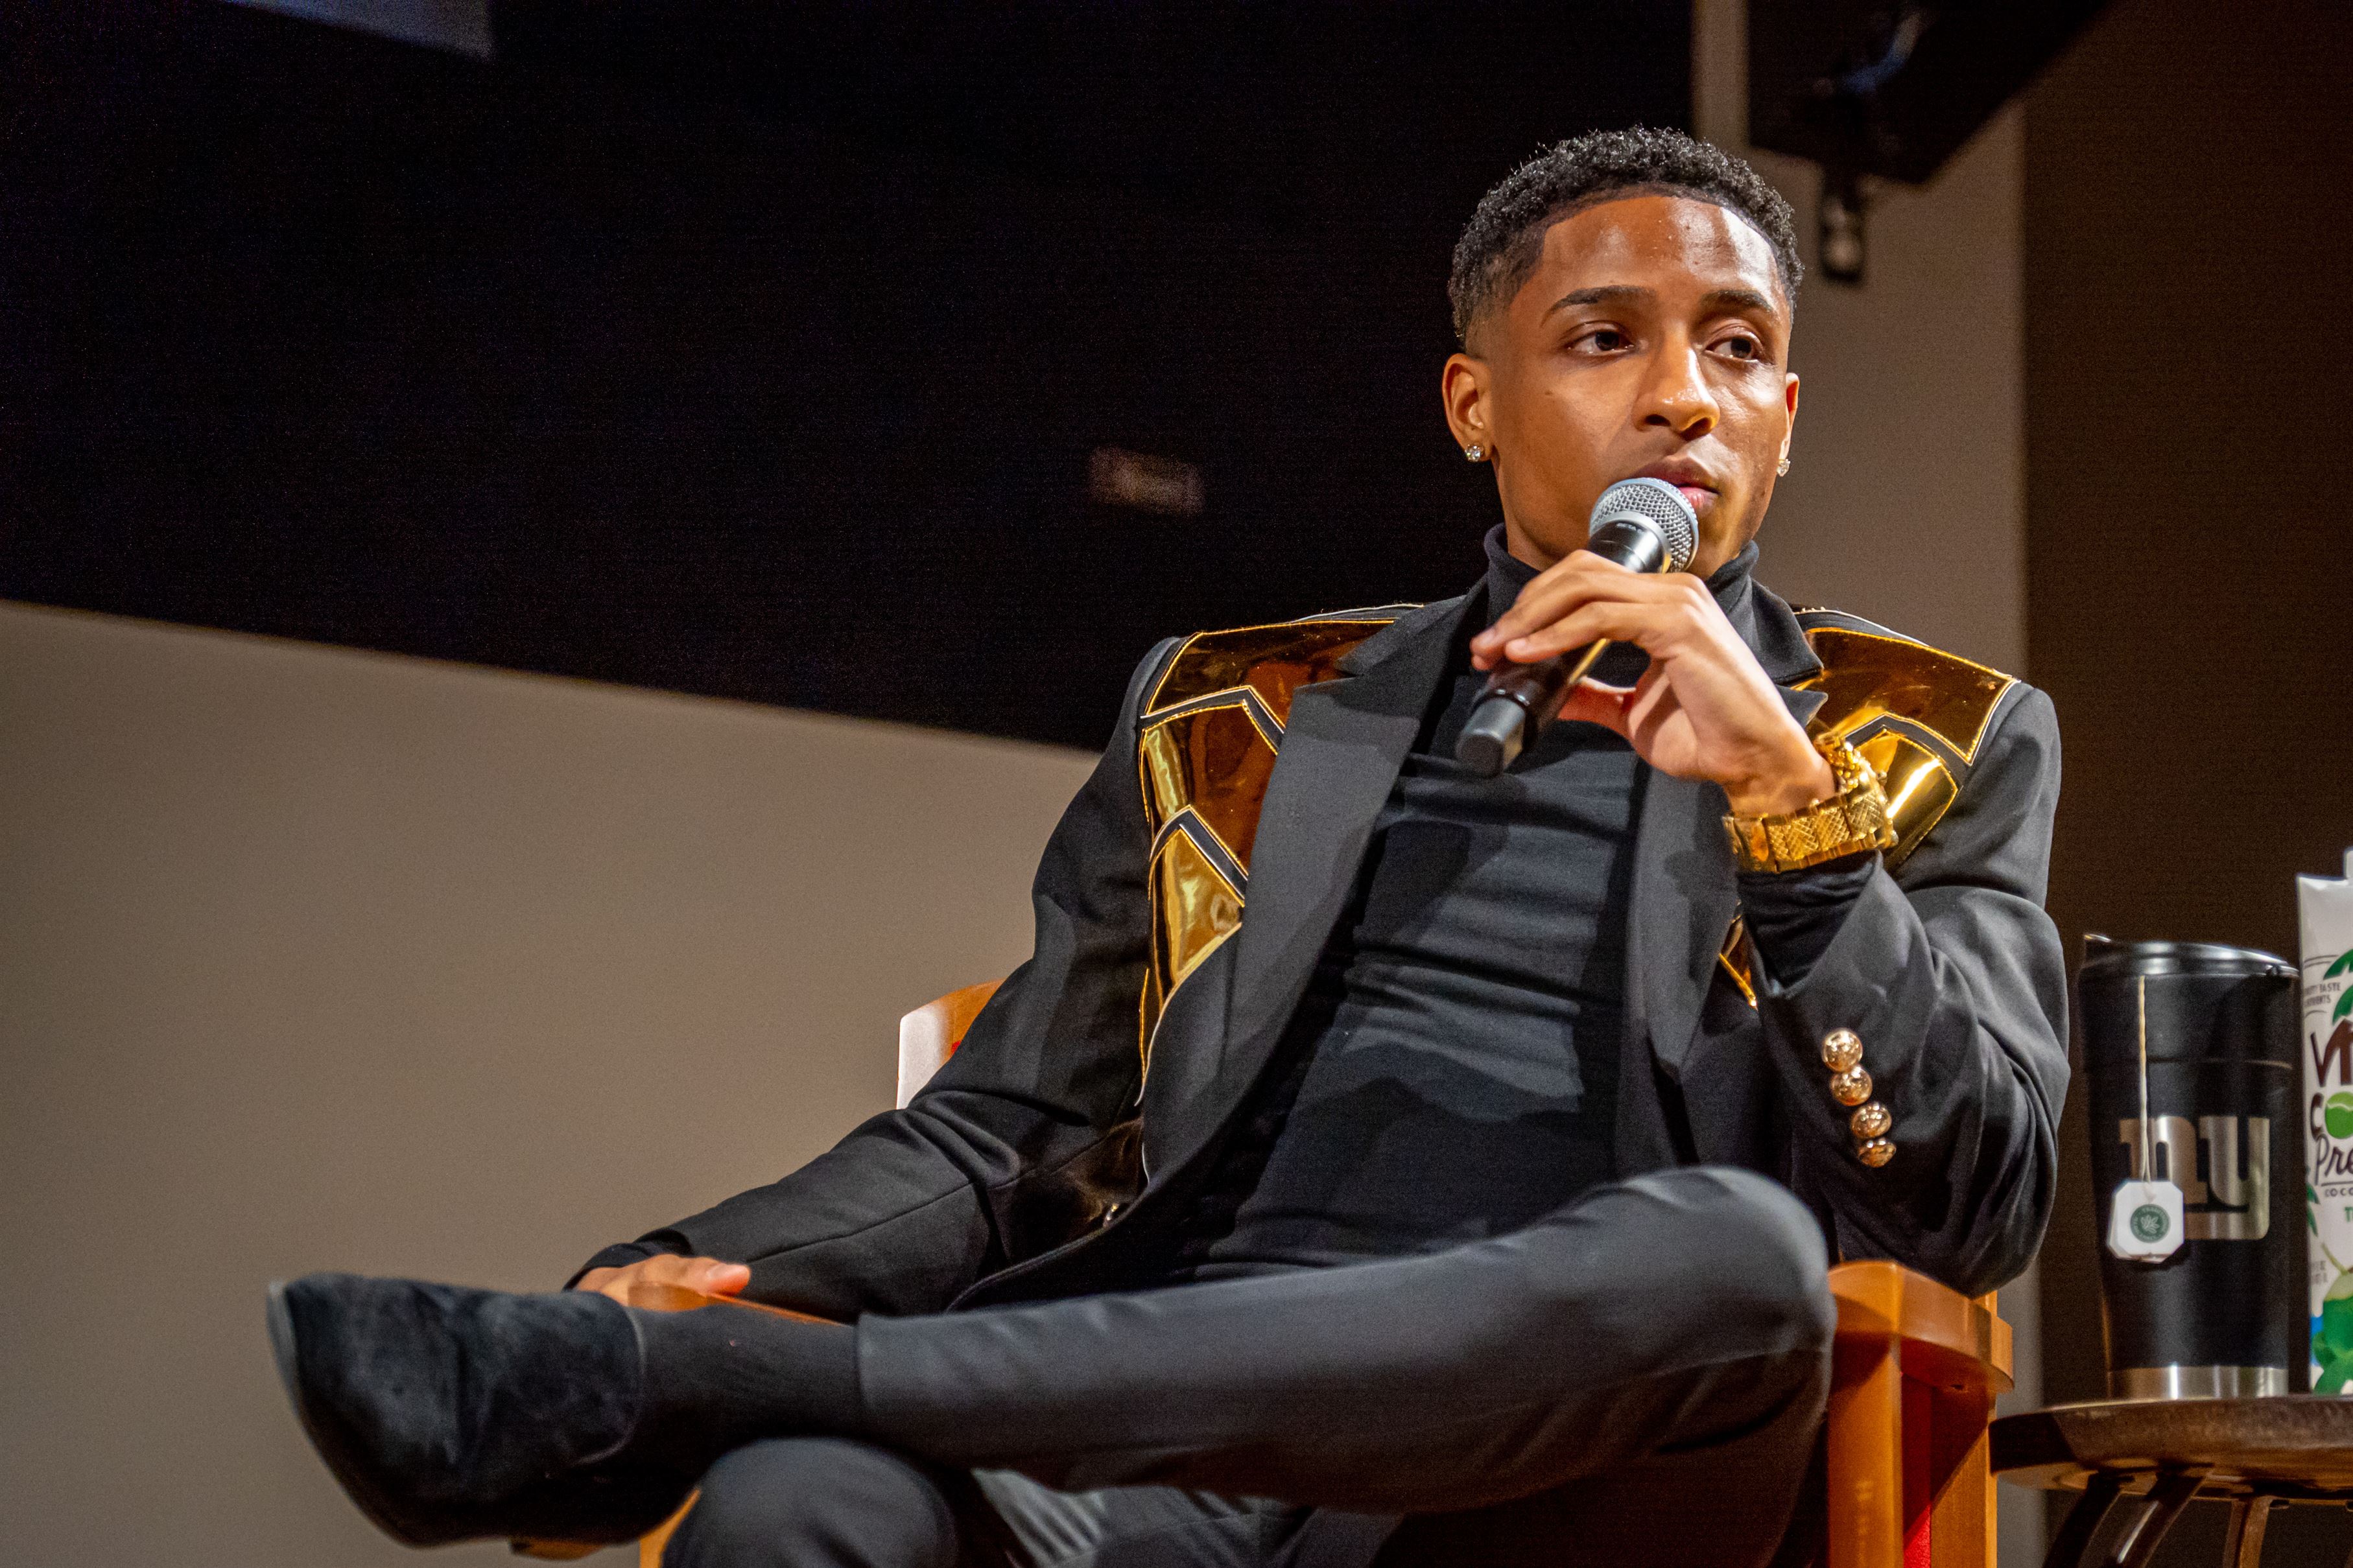 Myles Frost talks about the highs and lows in his journey of being in the performing arts. Lynise Olivacce | The Montclarion